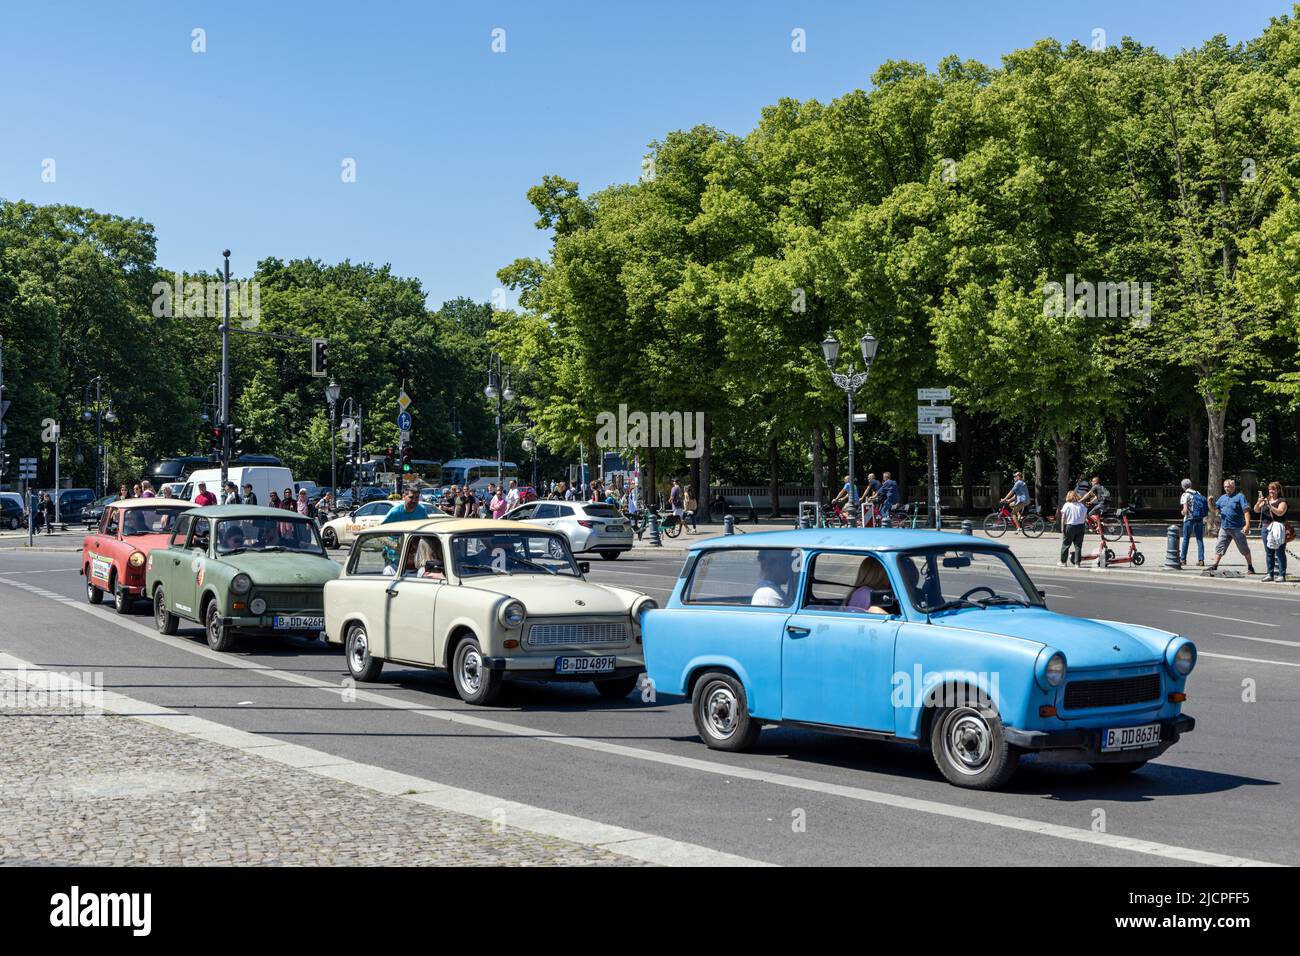 Trabi Safari, a group of classic Trabant cars used by Trabi-Safari / Trabi-World for rent or sightseeing tours in Berlin, Germany. Stock Photo